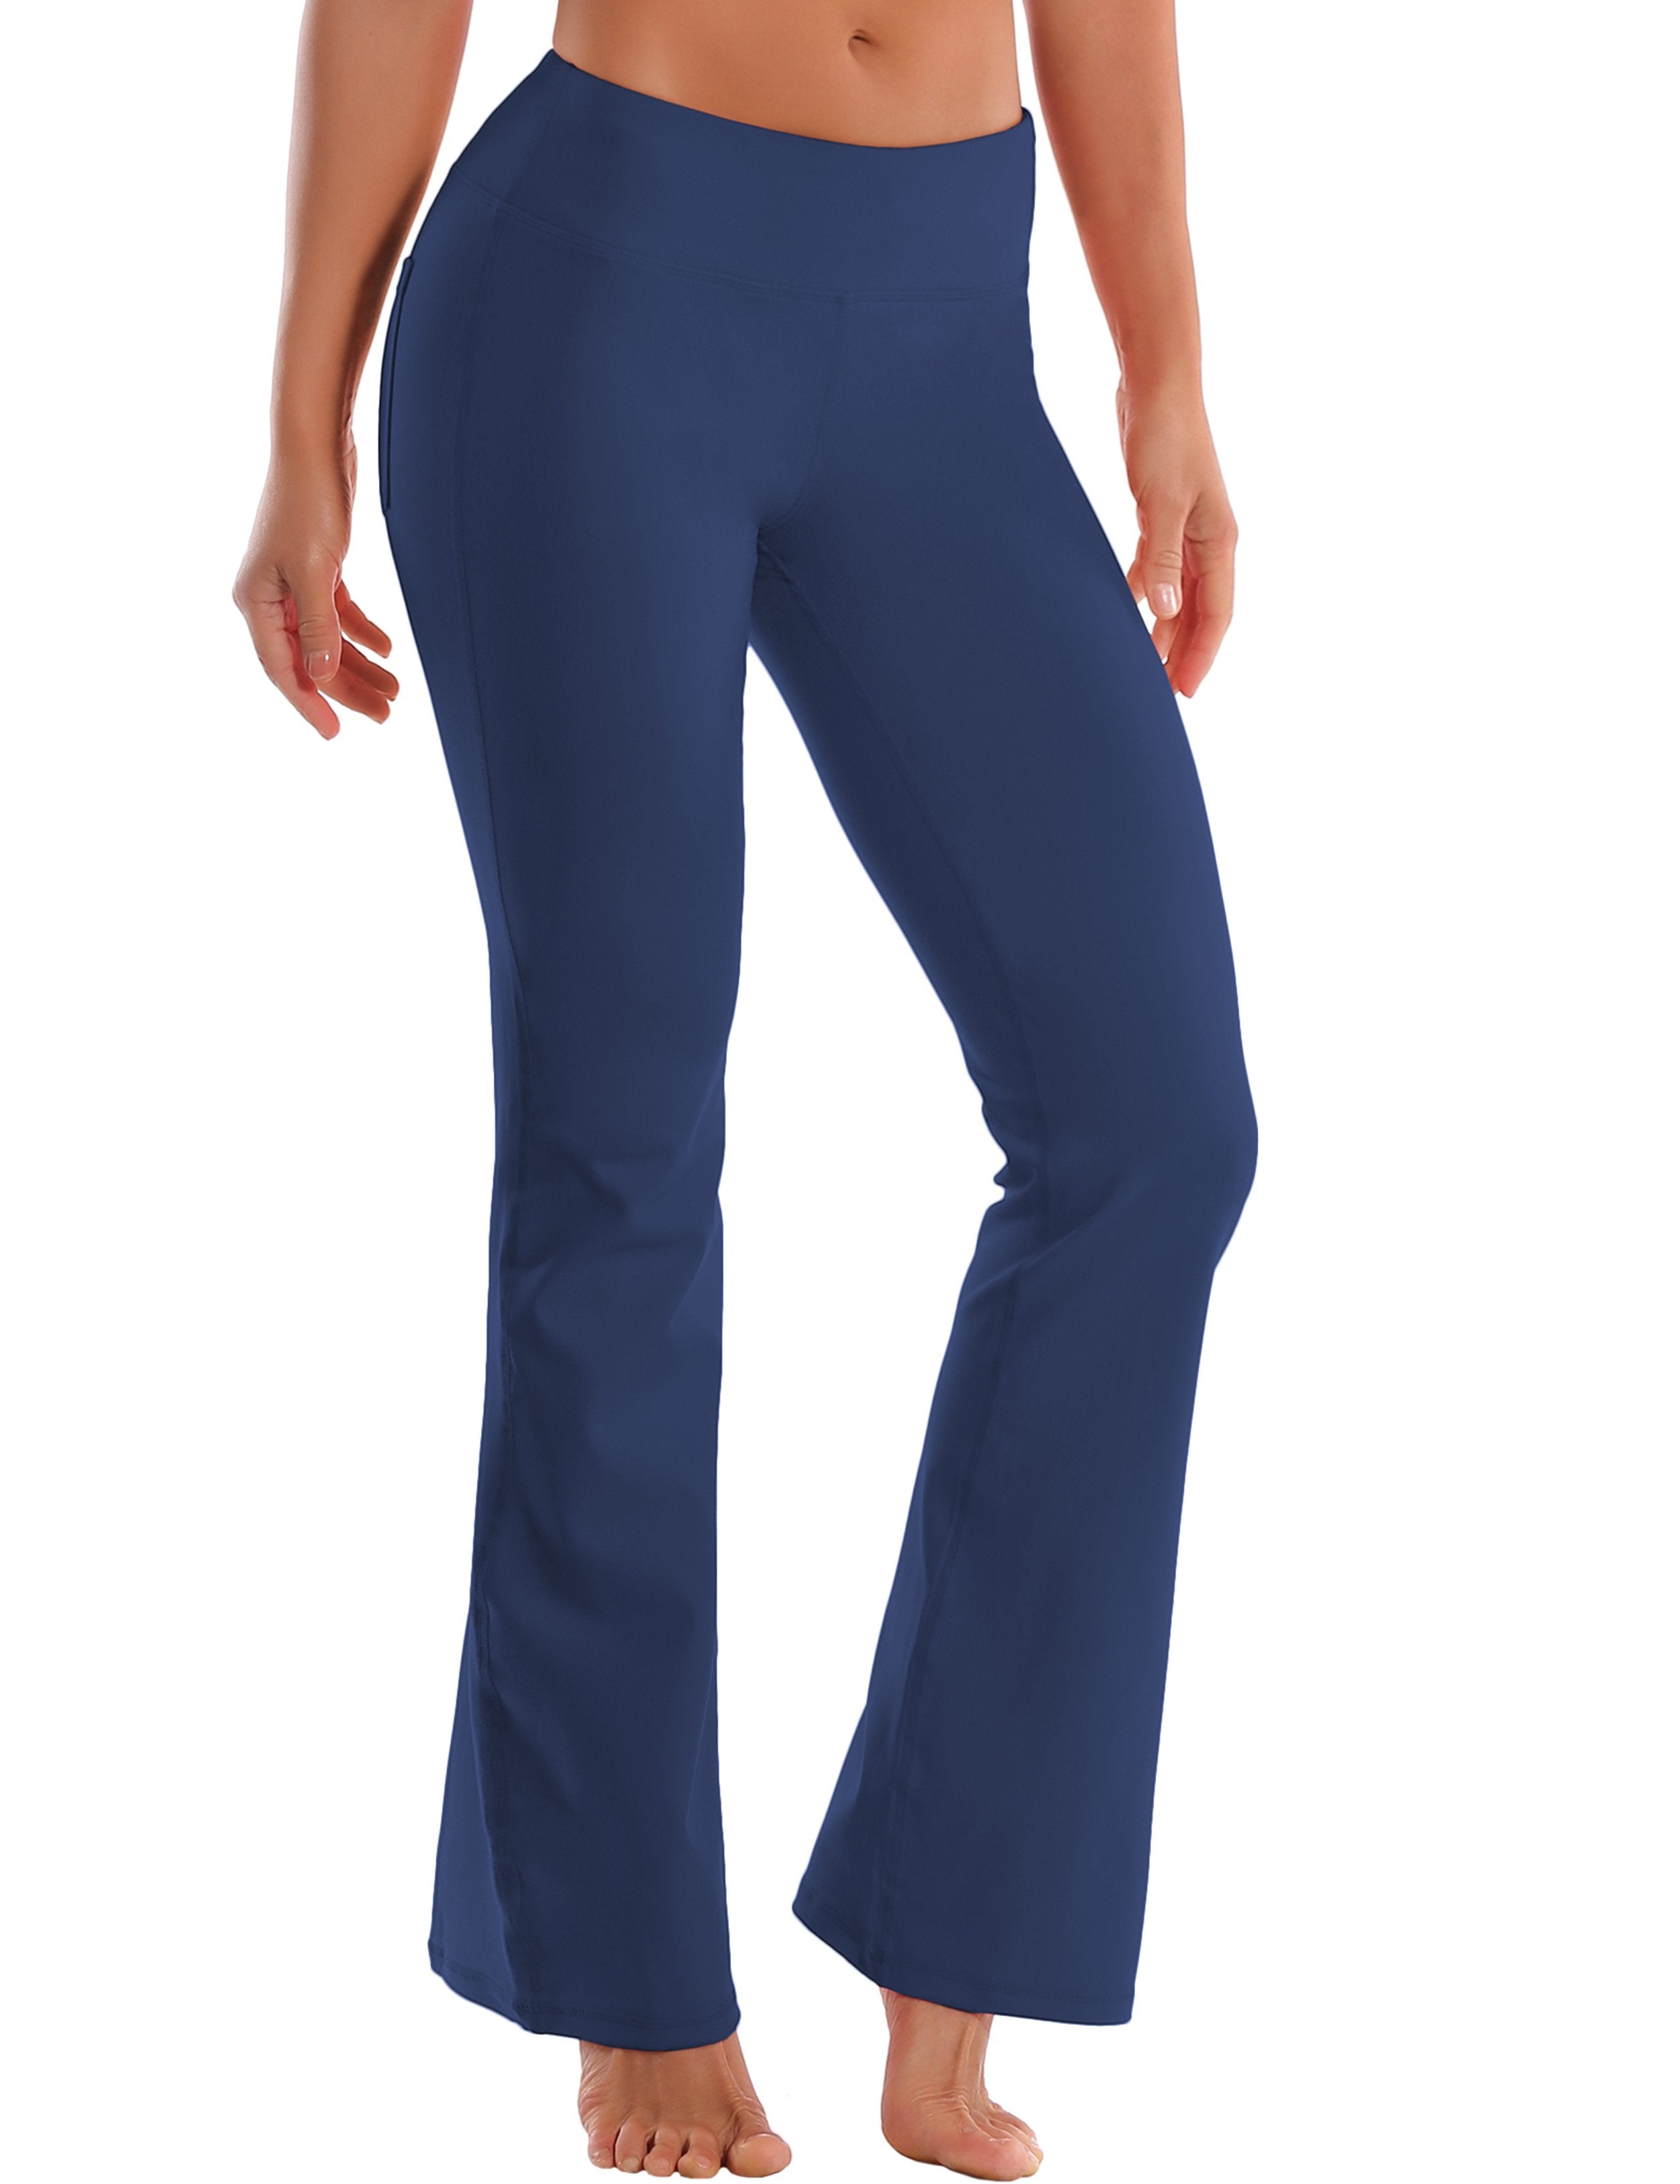 Back Pockets Bootcut Leggings purplishblue 87%Nylon/13%Spandex Fabric doesn't attract lint easily 4-way stretch No see-through Moisture-wicking Inner pocket Four lengths